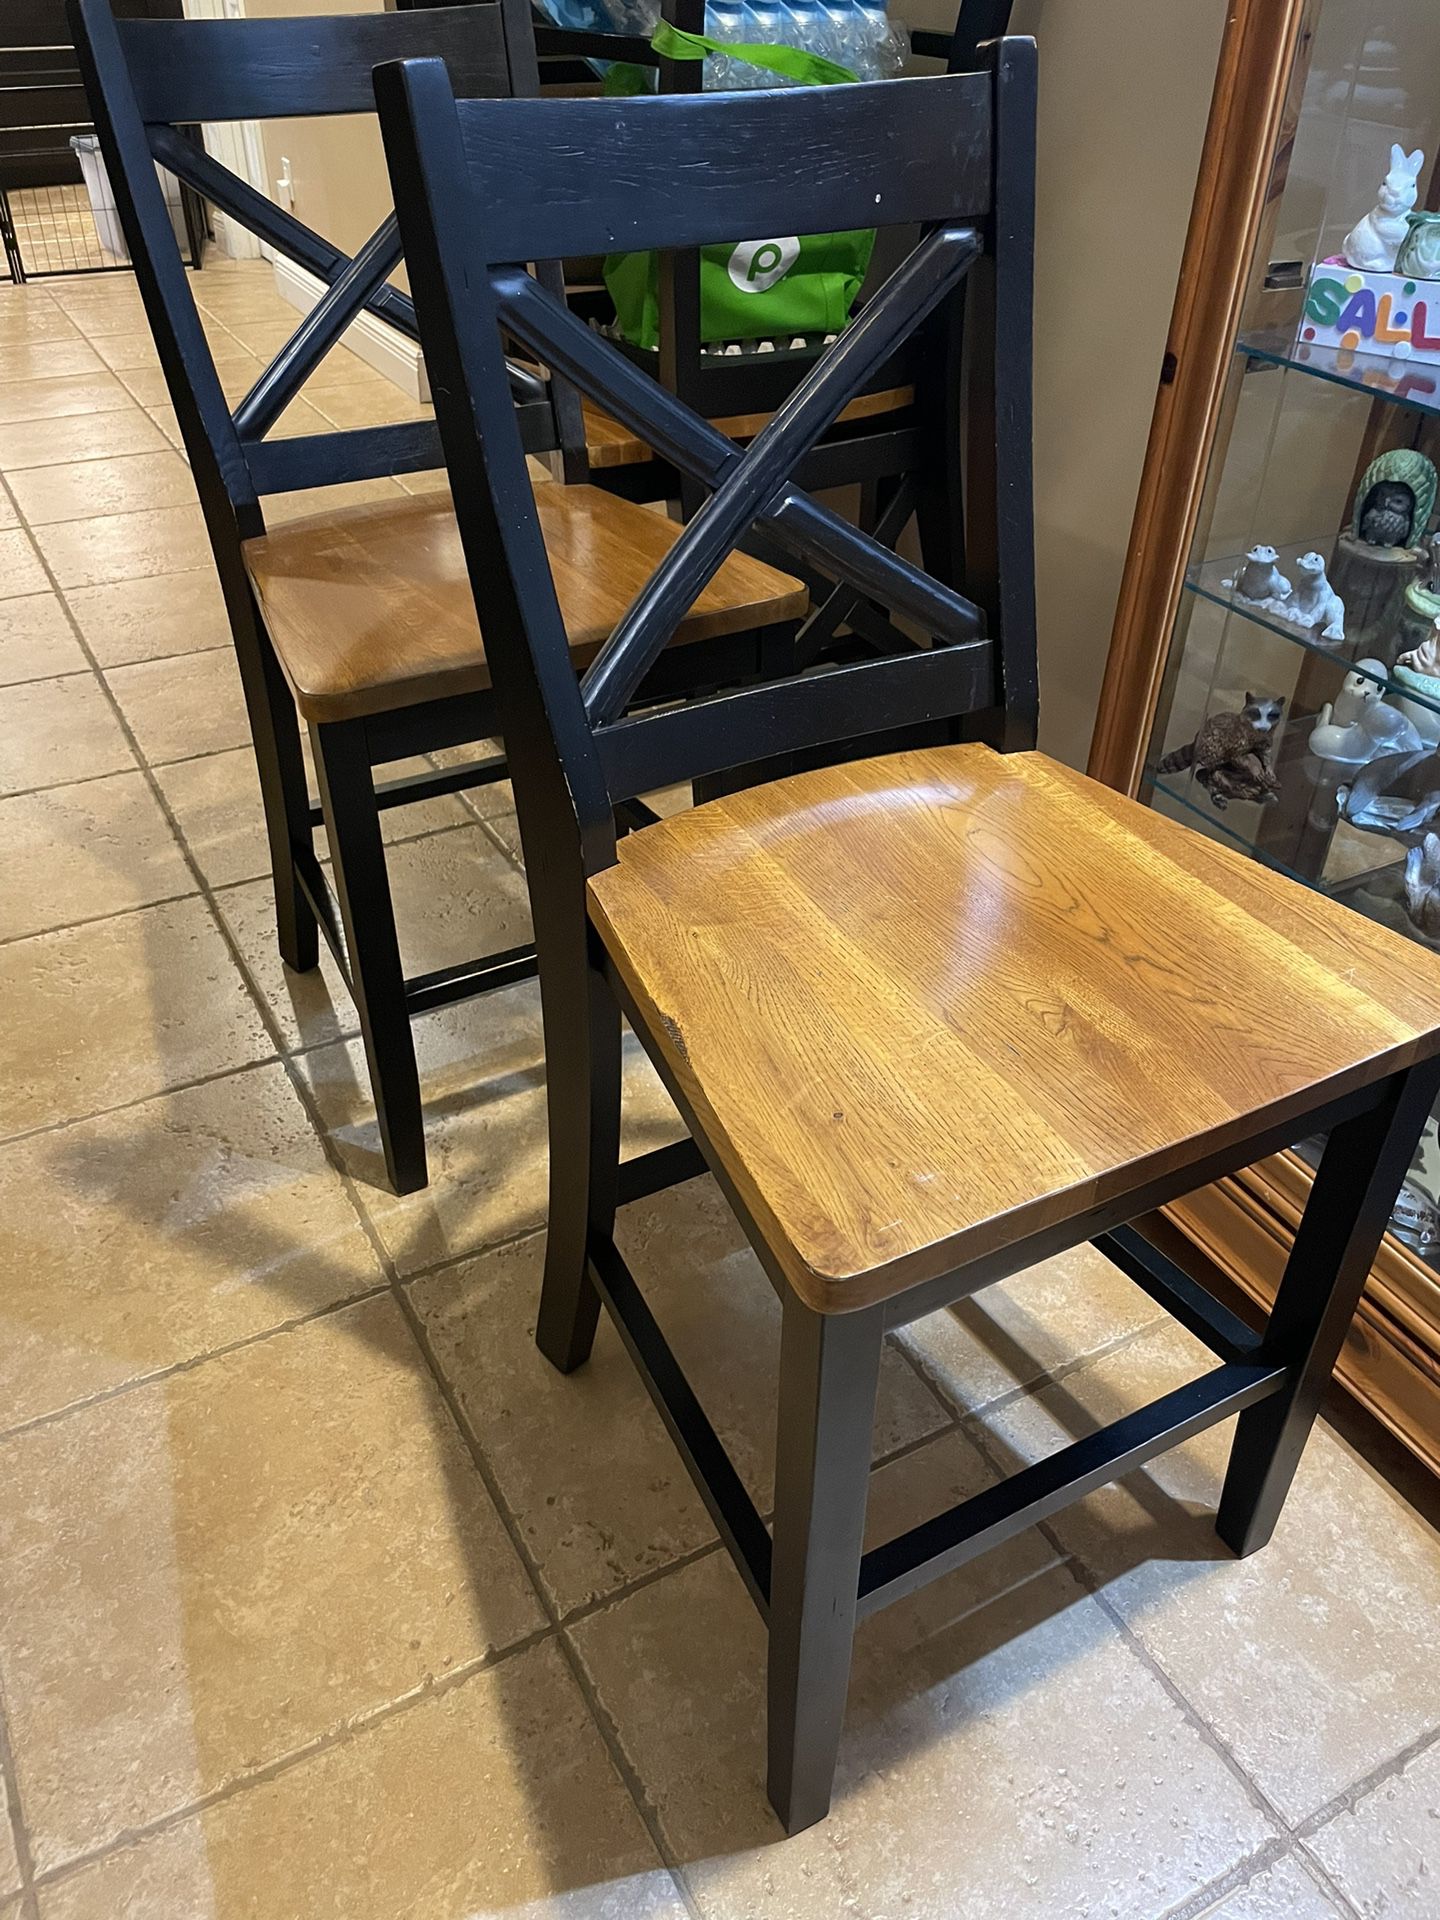 4 High Top Chairs